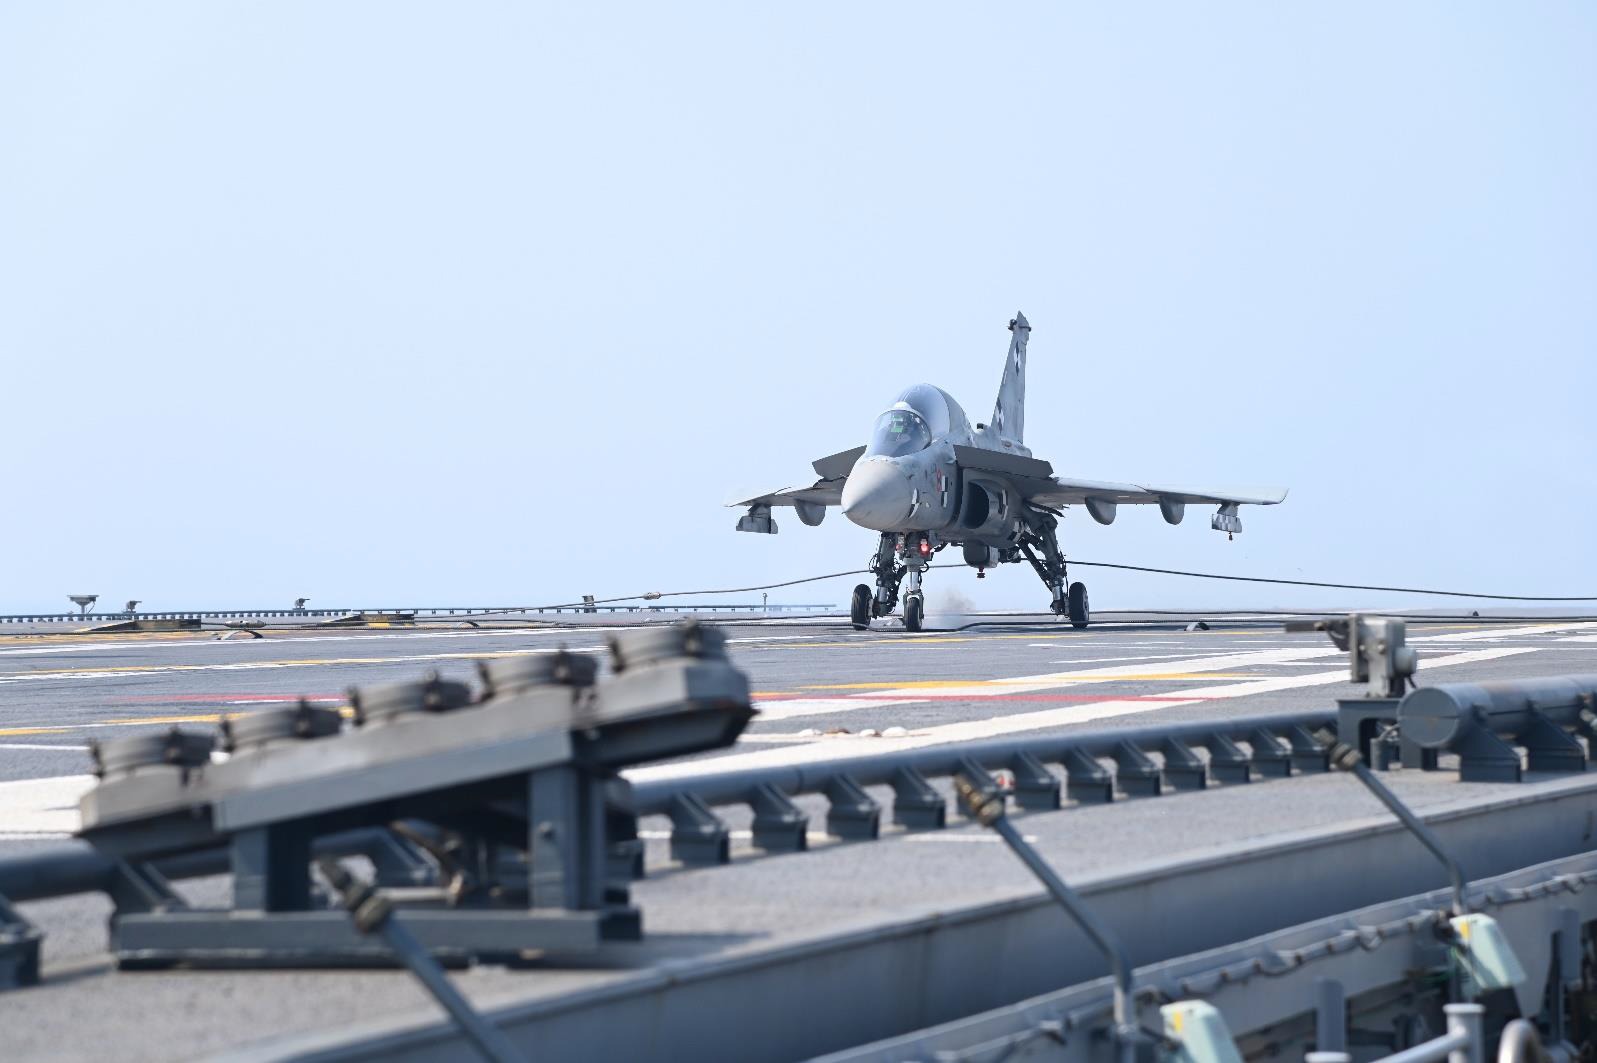 Naval Pilots carries out landing of LCA(Navy) on INS Vikrant